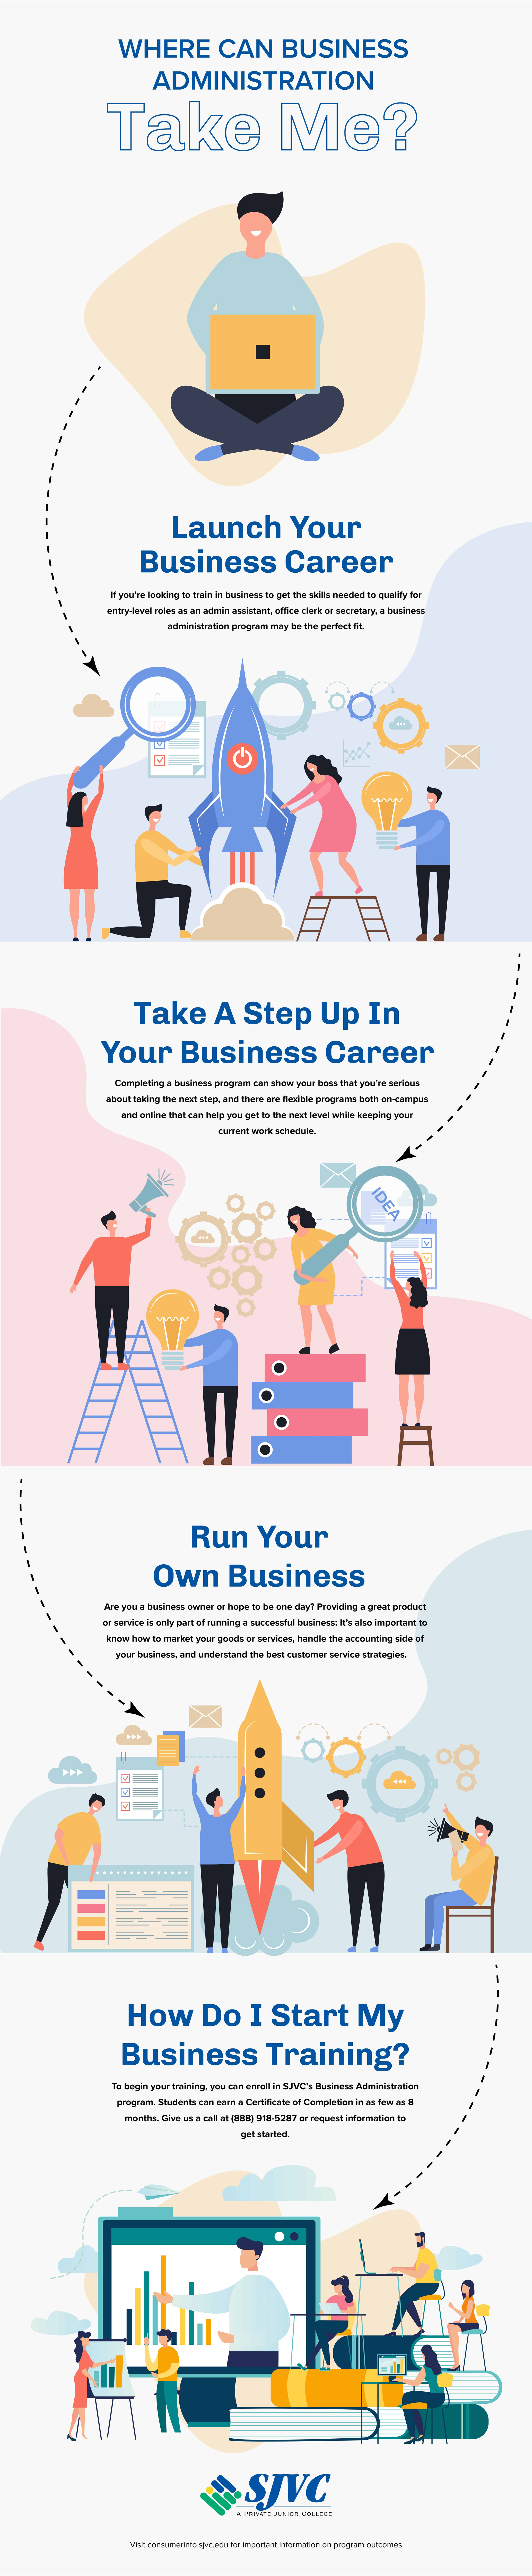 Where Can Business Administration Take Me? Infographic